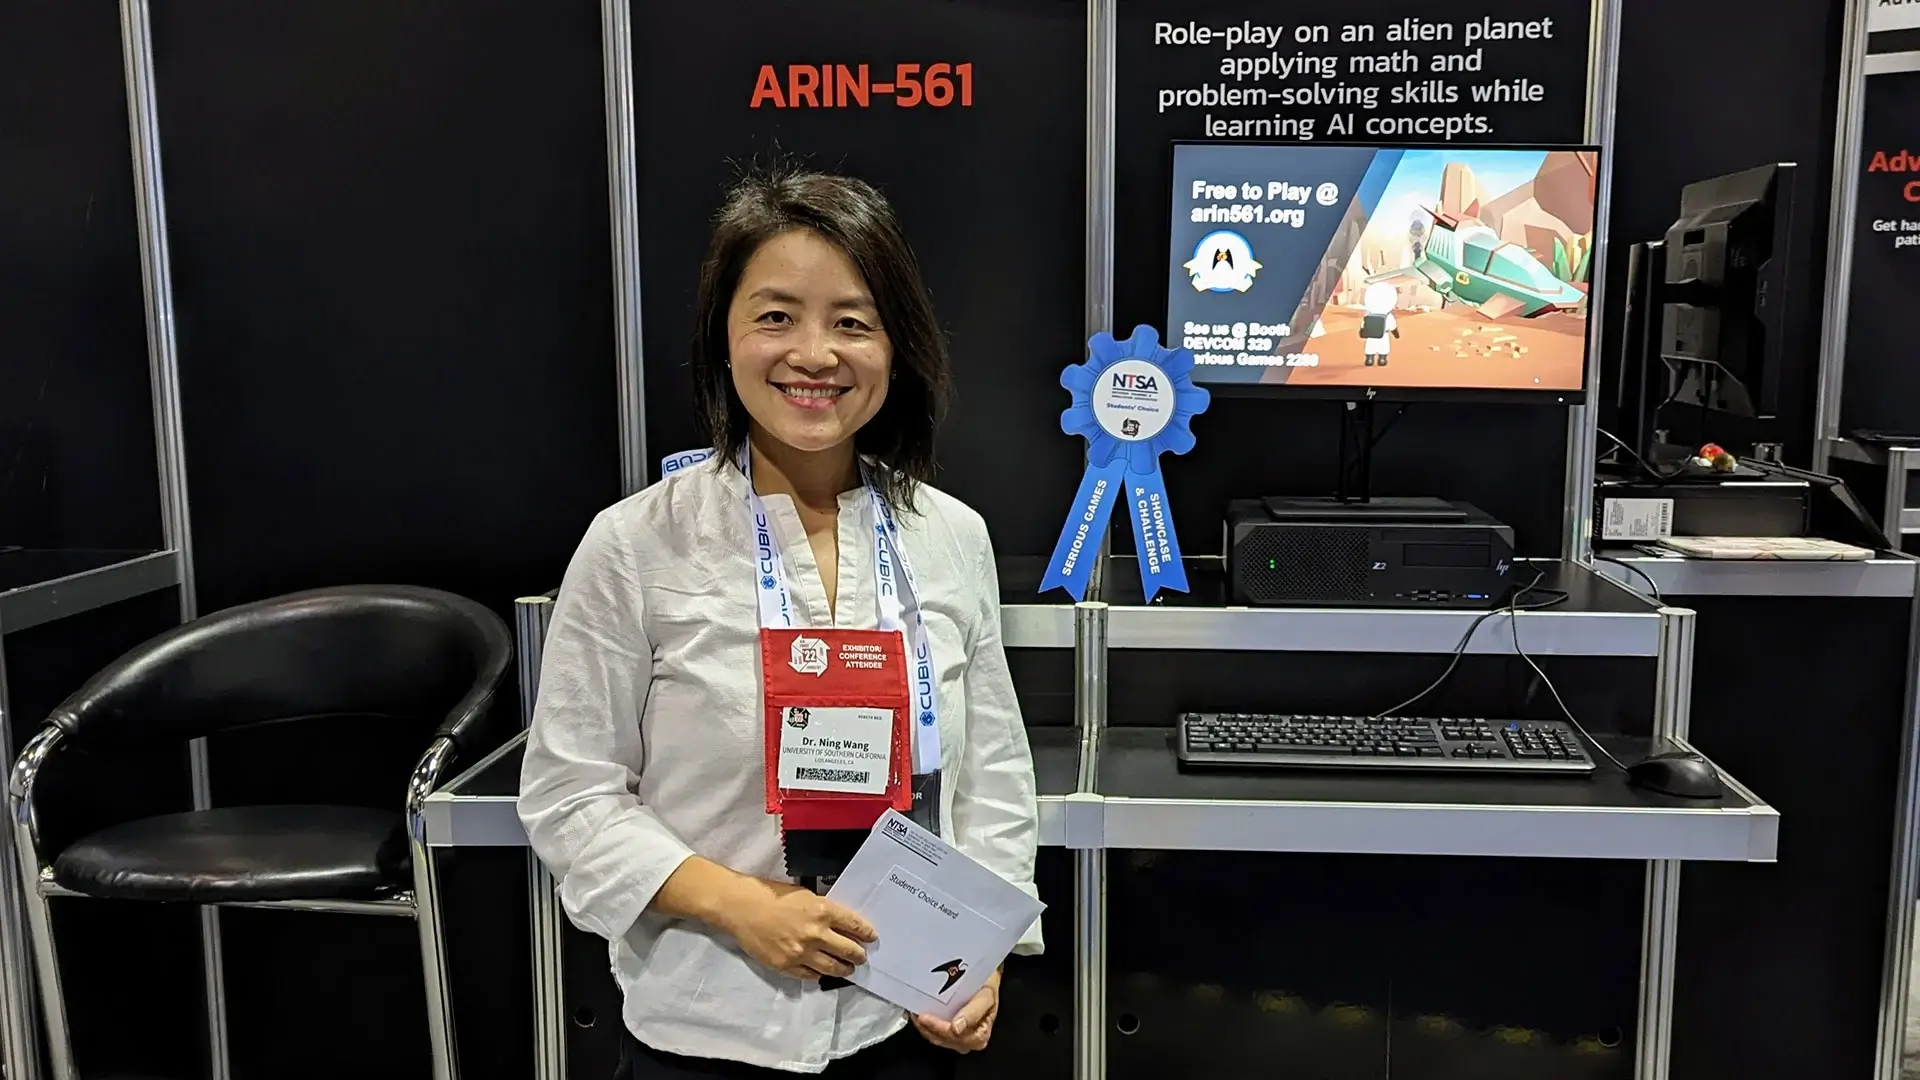 Ning Wang in front of ARIN-561 Game booth at IITSEC 2022